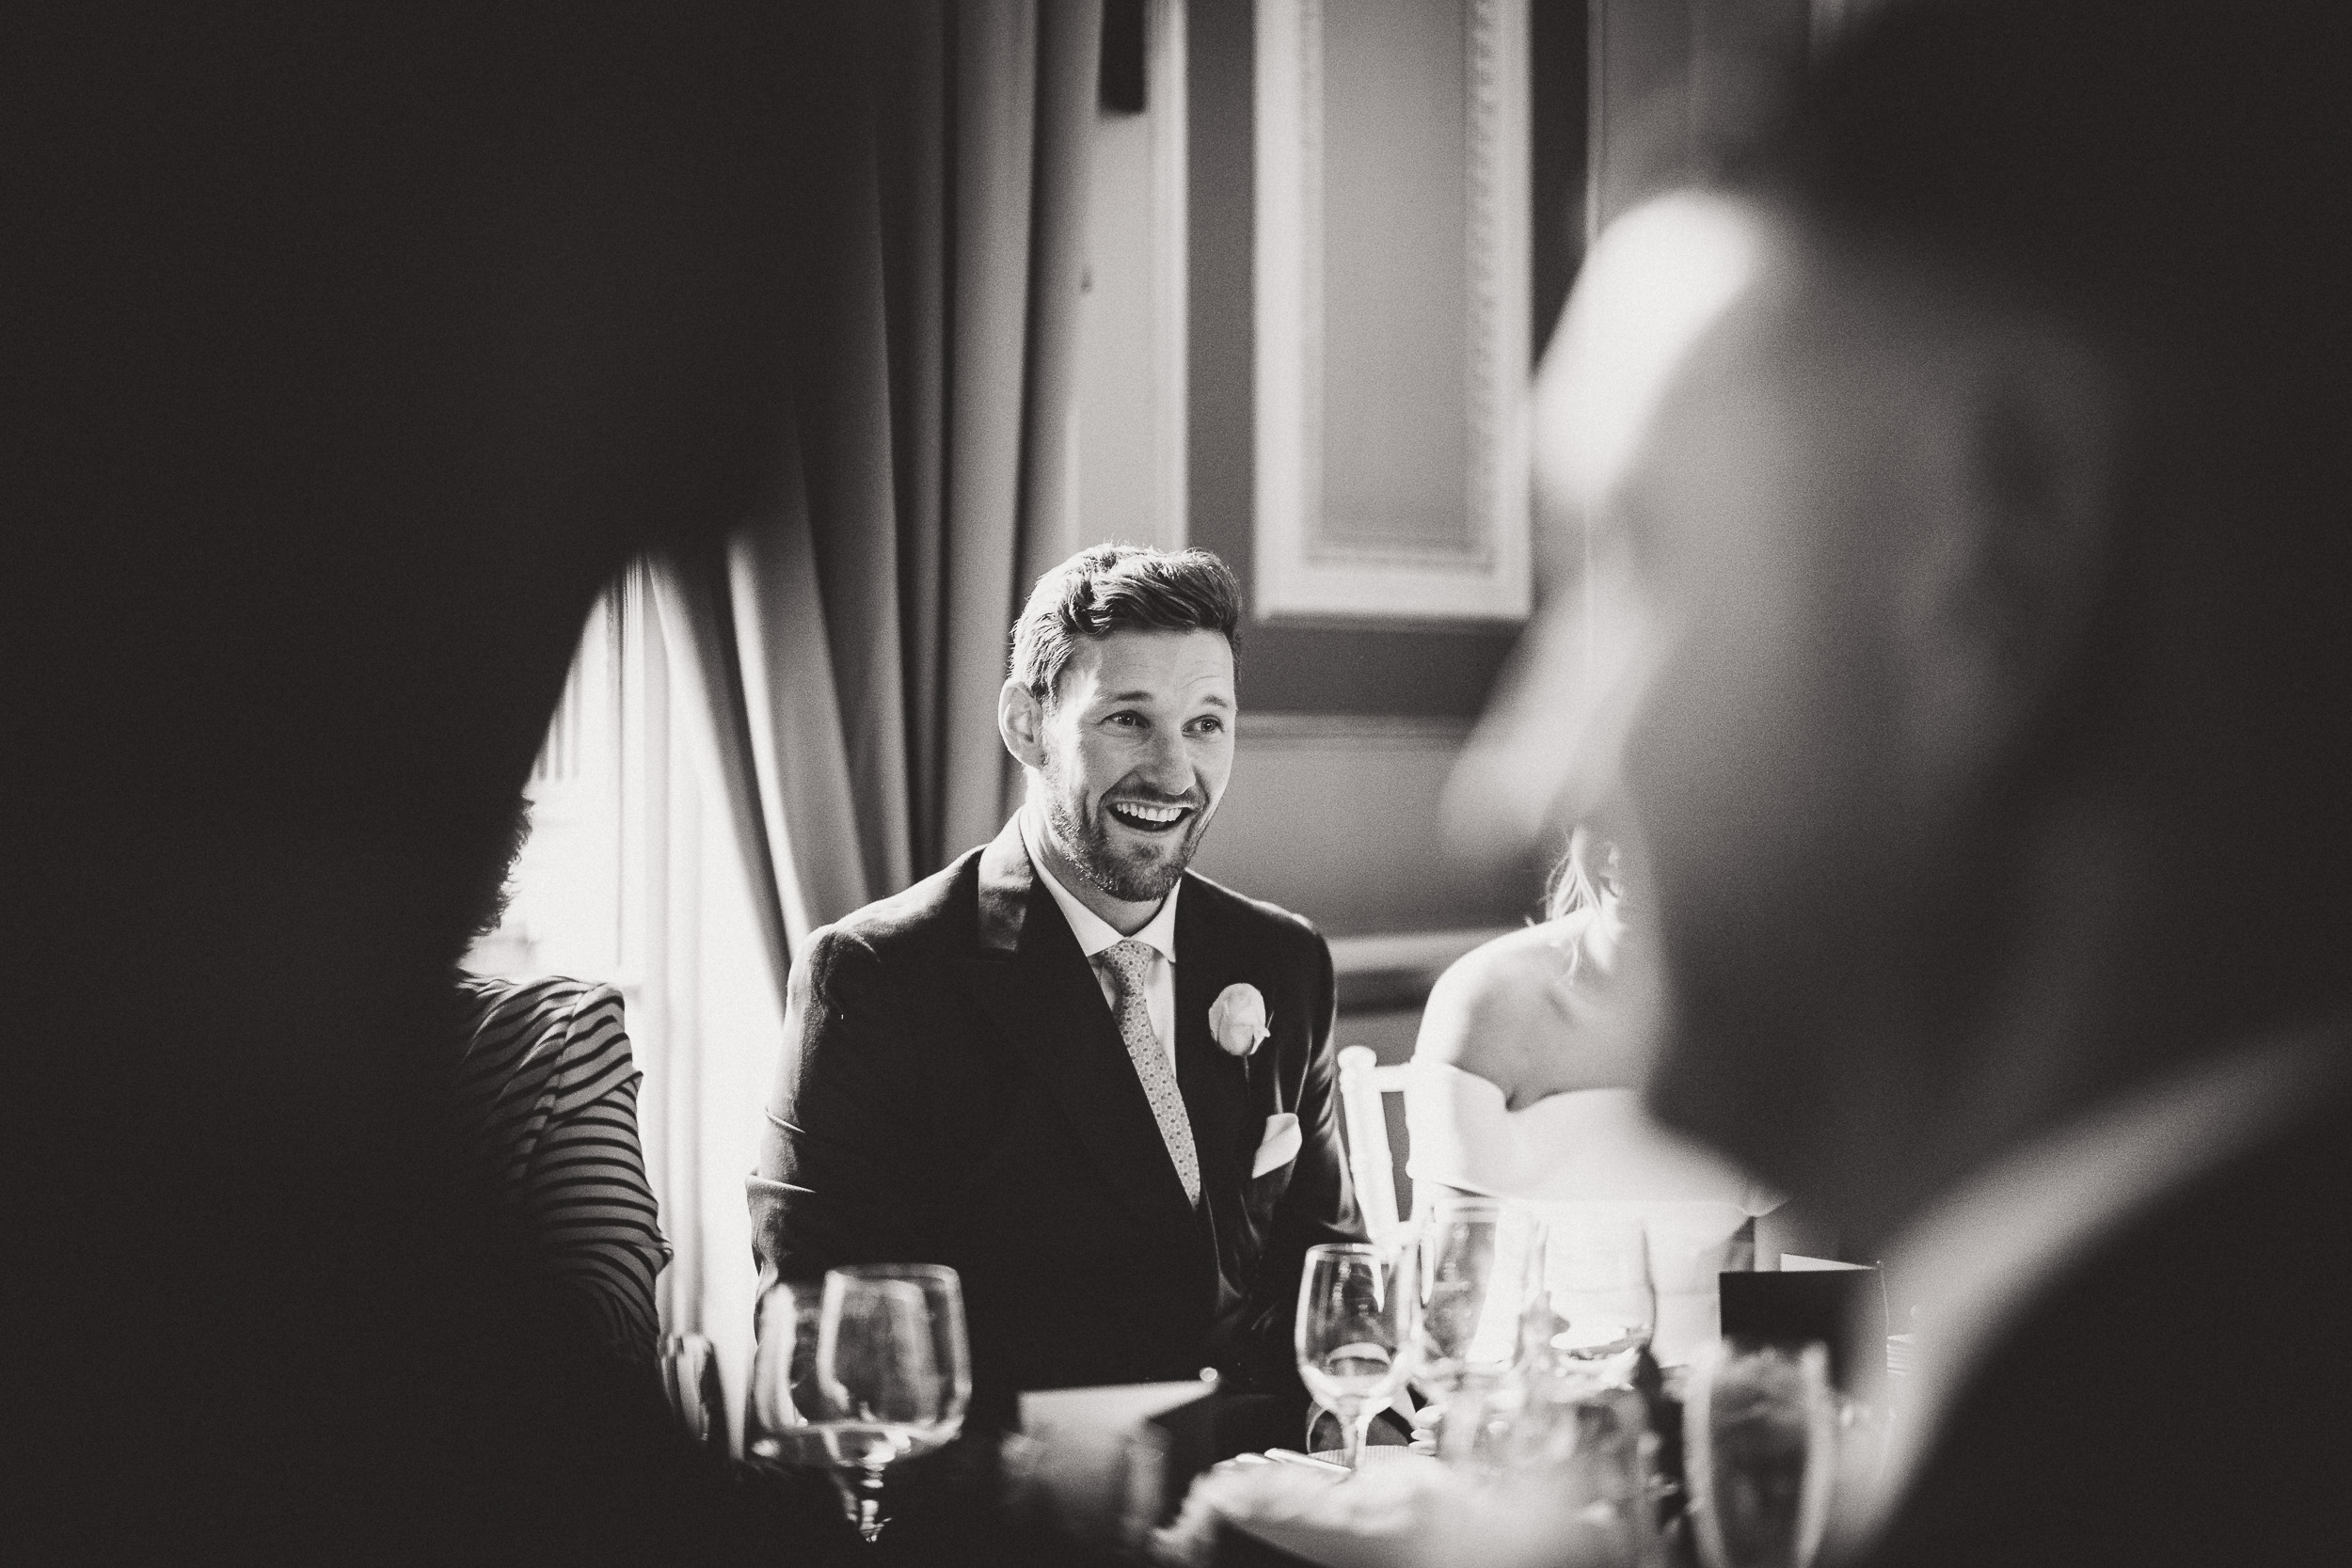 A wedding photo capturing a joyful moment as the groom bursts into laughter.